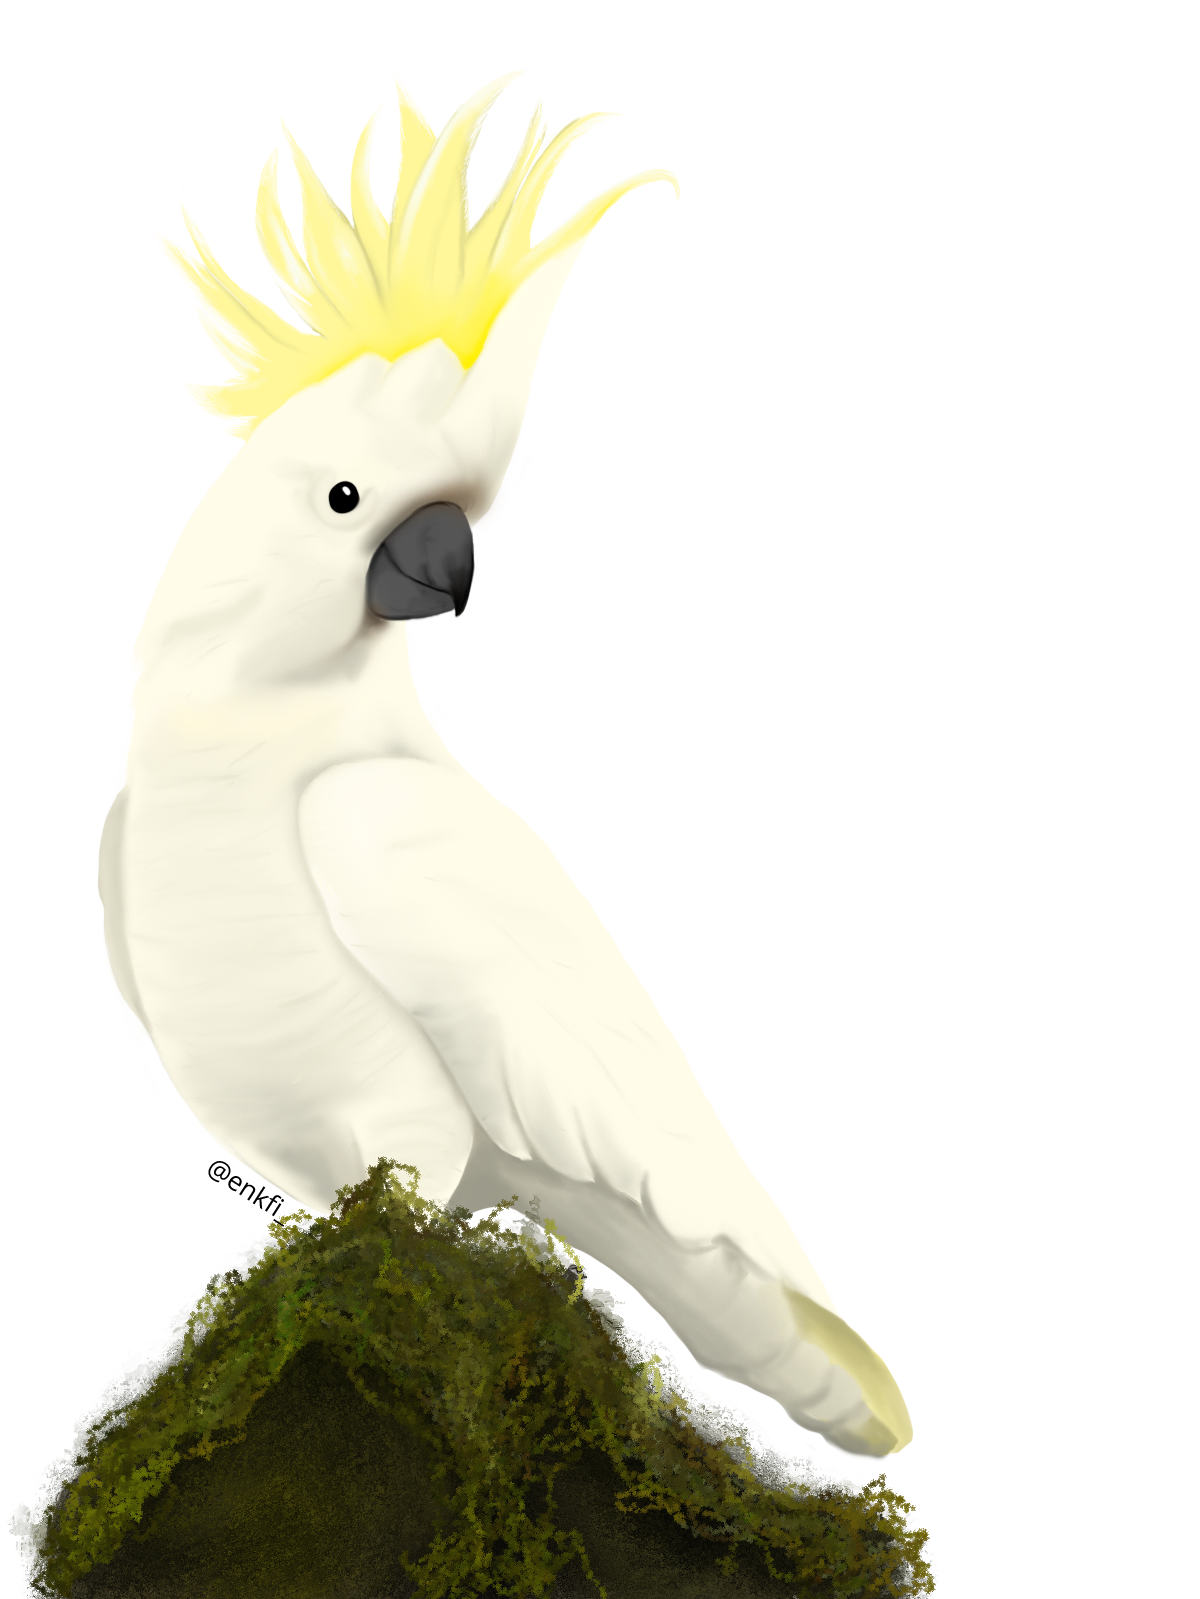 An elegant cockatoo, showcasing its vibrant beauty. The cockatoo is perched on a grey, jagged rock that’s partially covered in green moss. Its feathers, predominantly white, covers the entirety of its body. It’s large crest crowns its head, standing tall and catching the eye with its magnificent display of yellow feathers. It has black eyes with its beak that’s a grey shade.